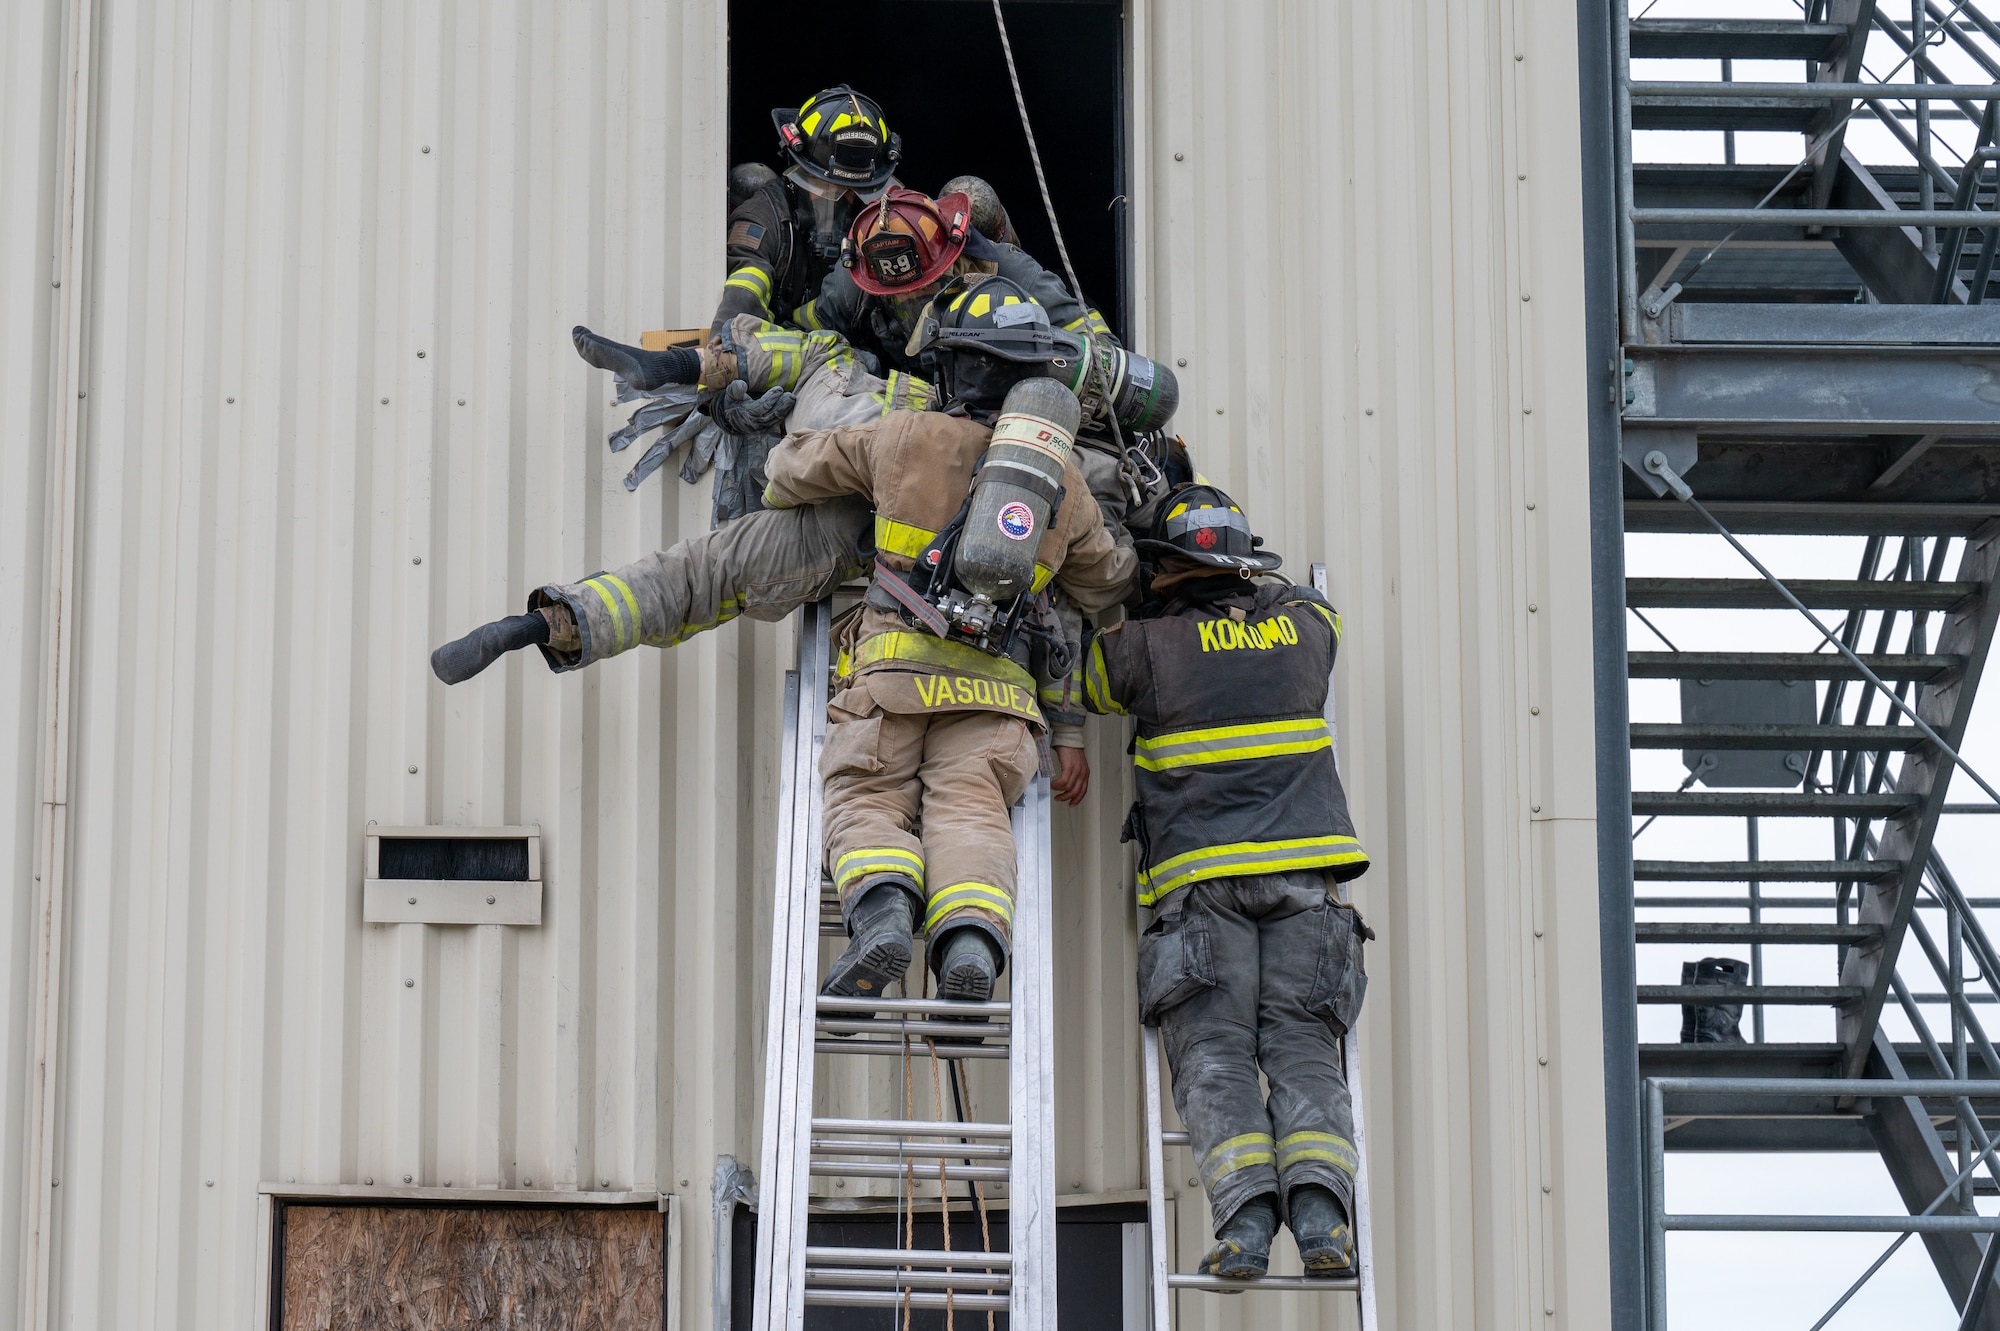 Two firefighters stand on two ladders, side by side. At the top of the ladder, two firefighters lifting another firefighter out of the window and down to the laddered firefighters.